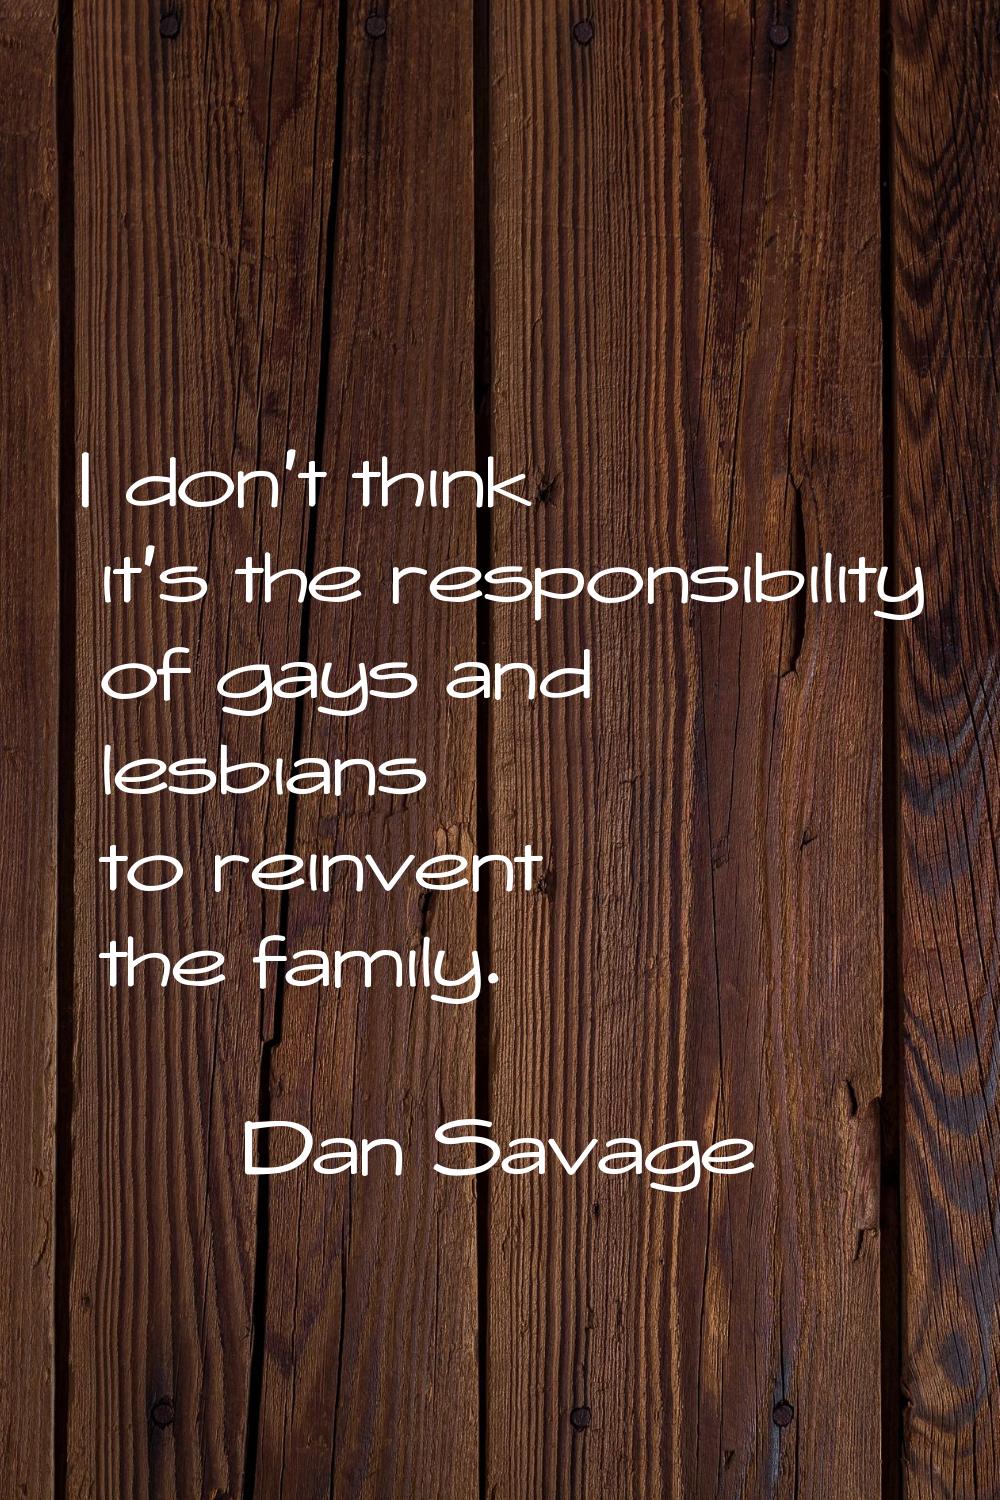 I don't think it's the responsibility of gays and lesbians to reinvent the family.